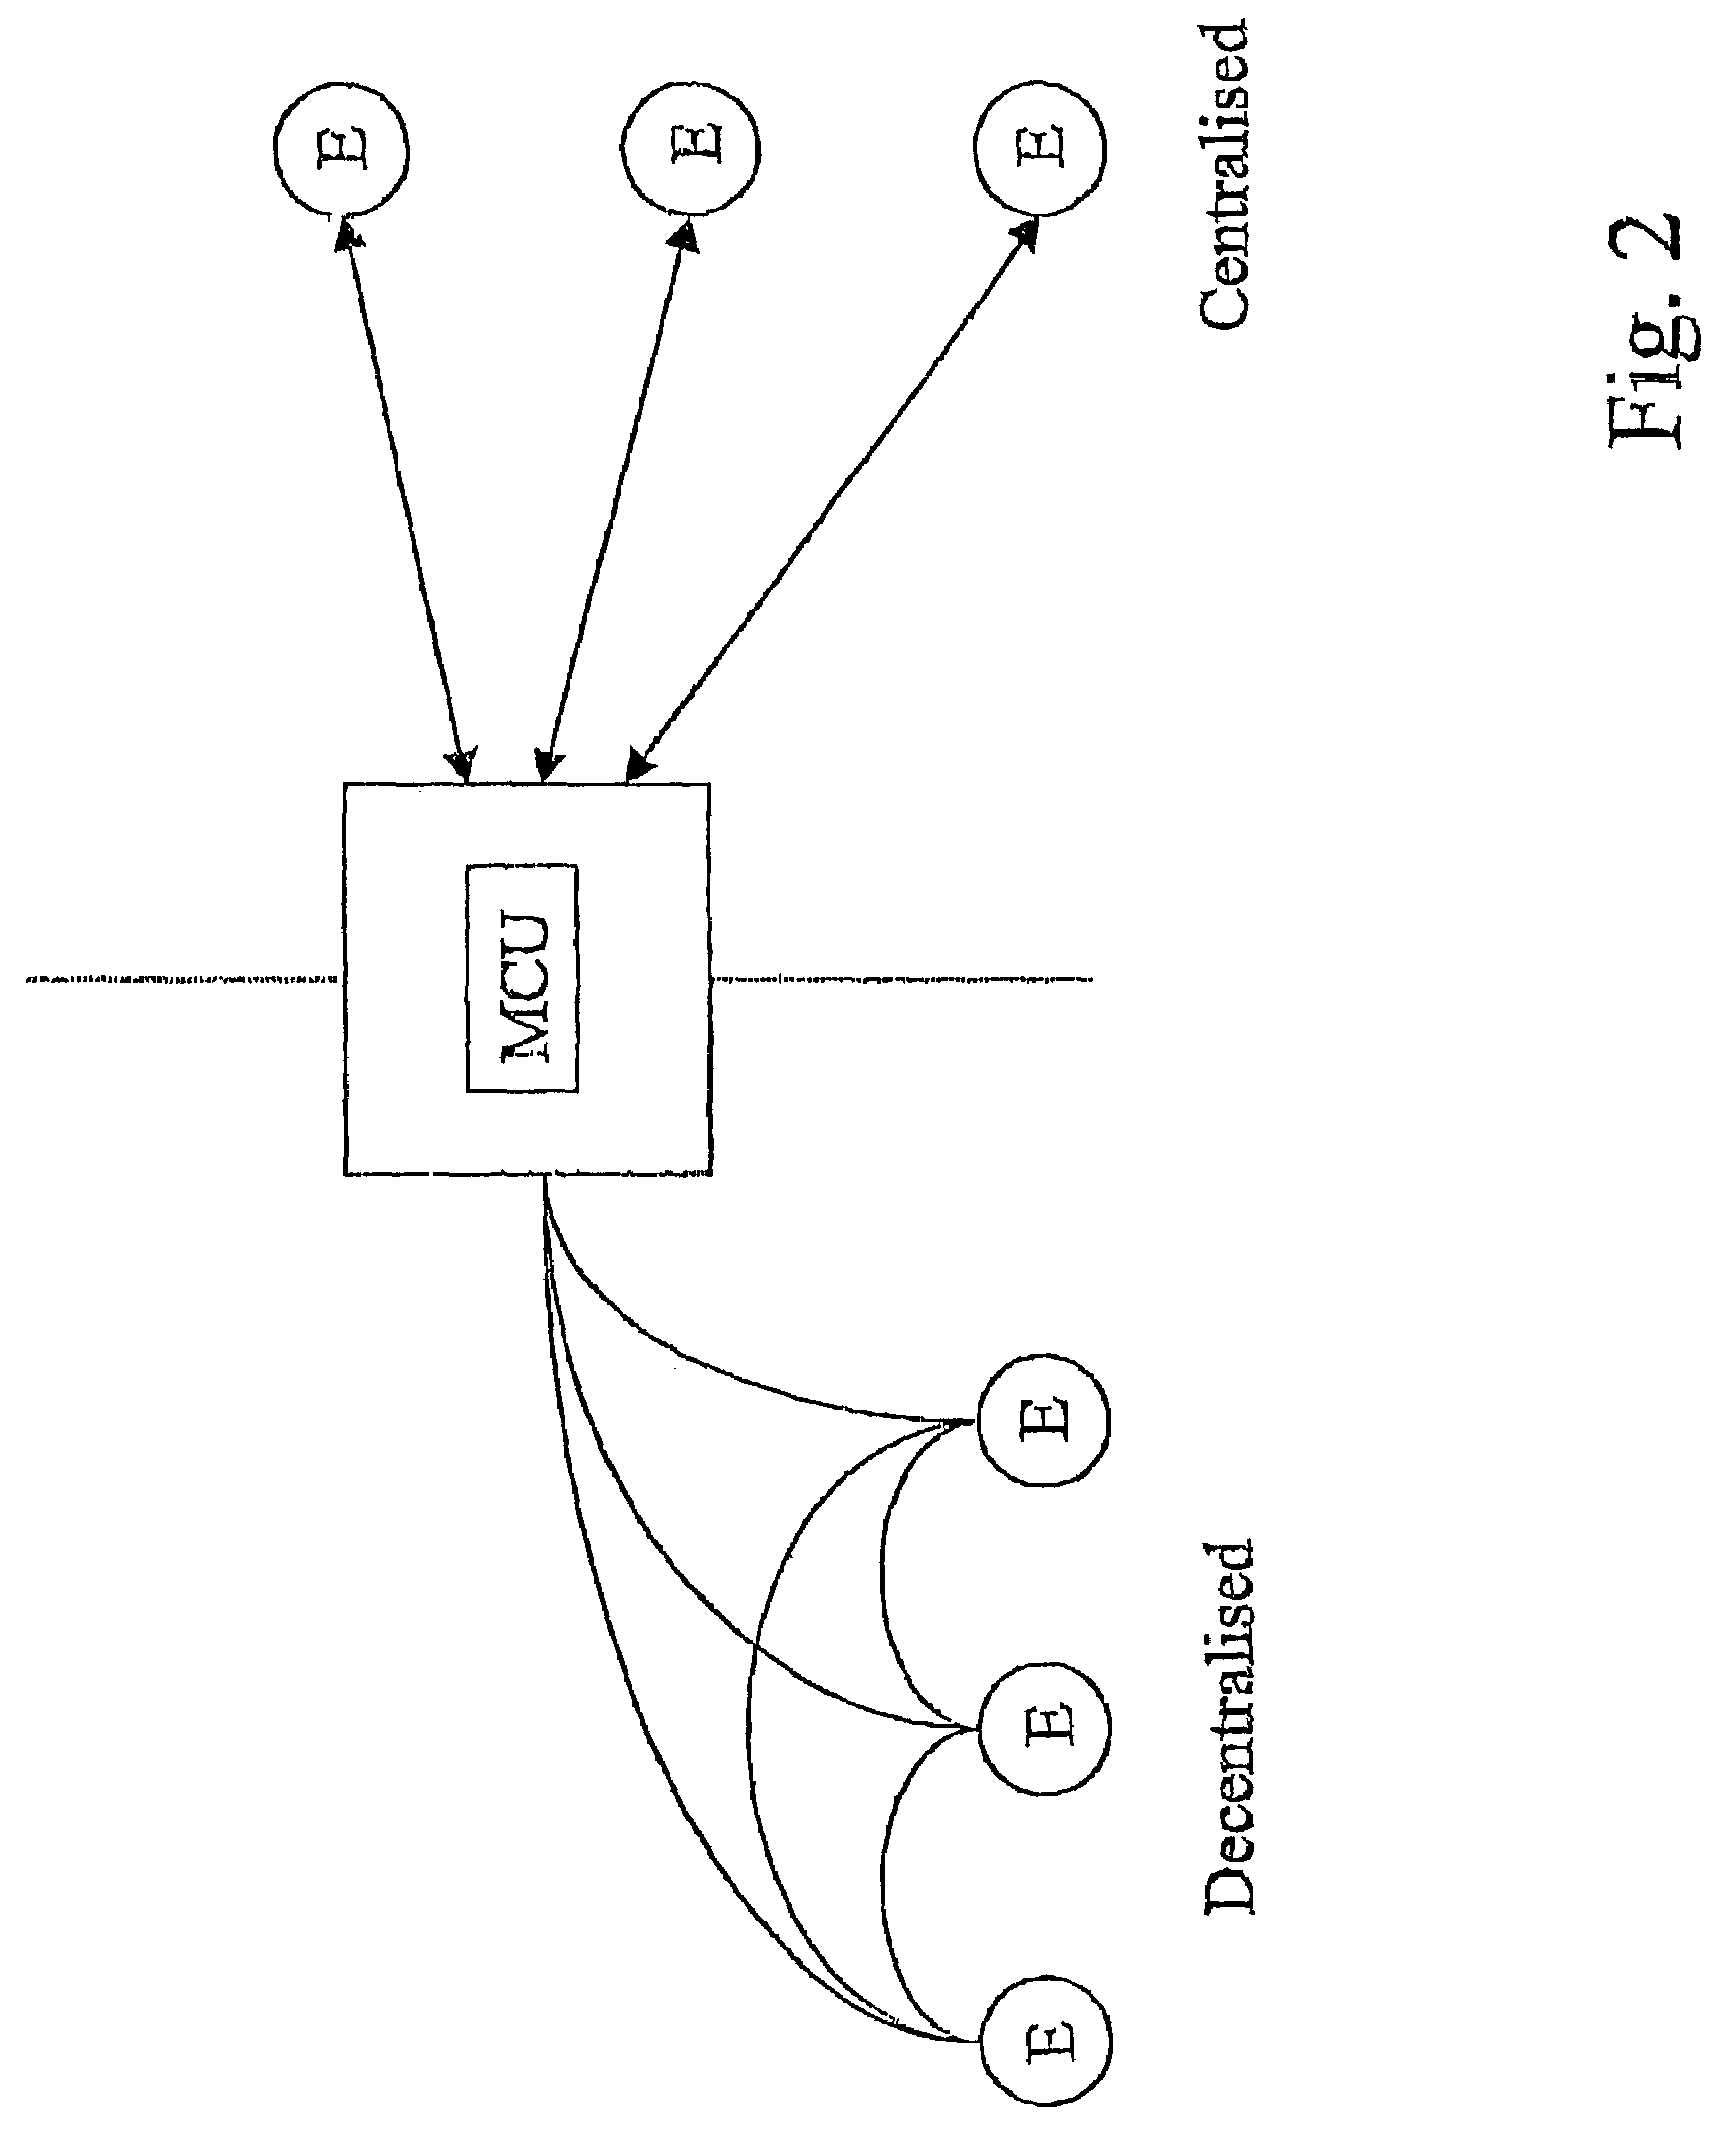 Method for, and a topology aware resource manager in an IP-telephony system